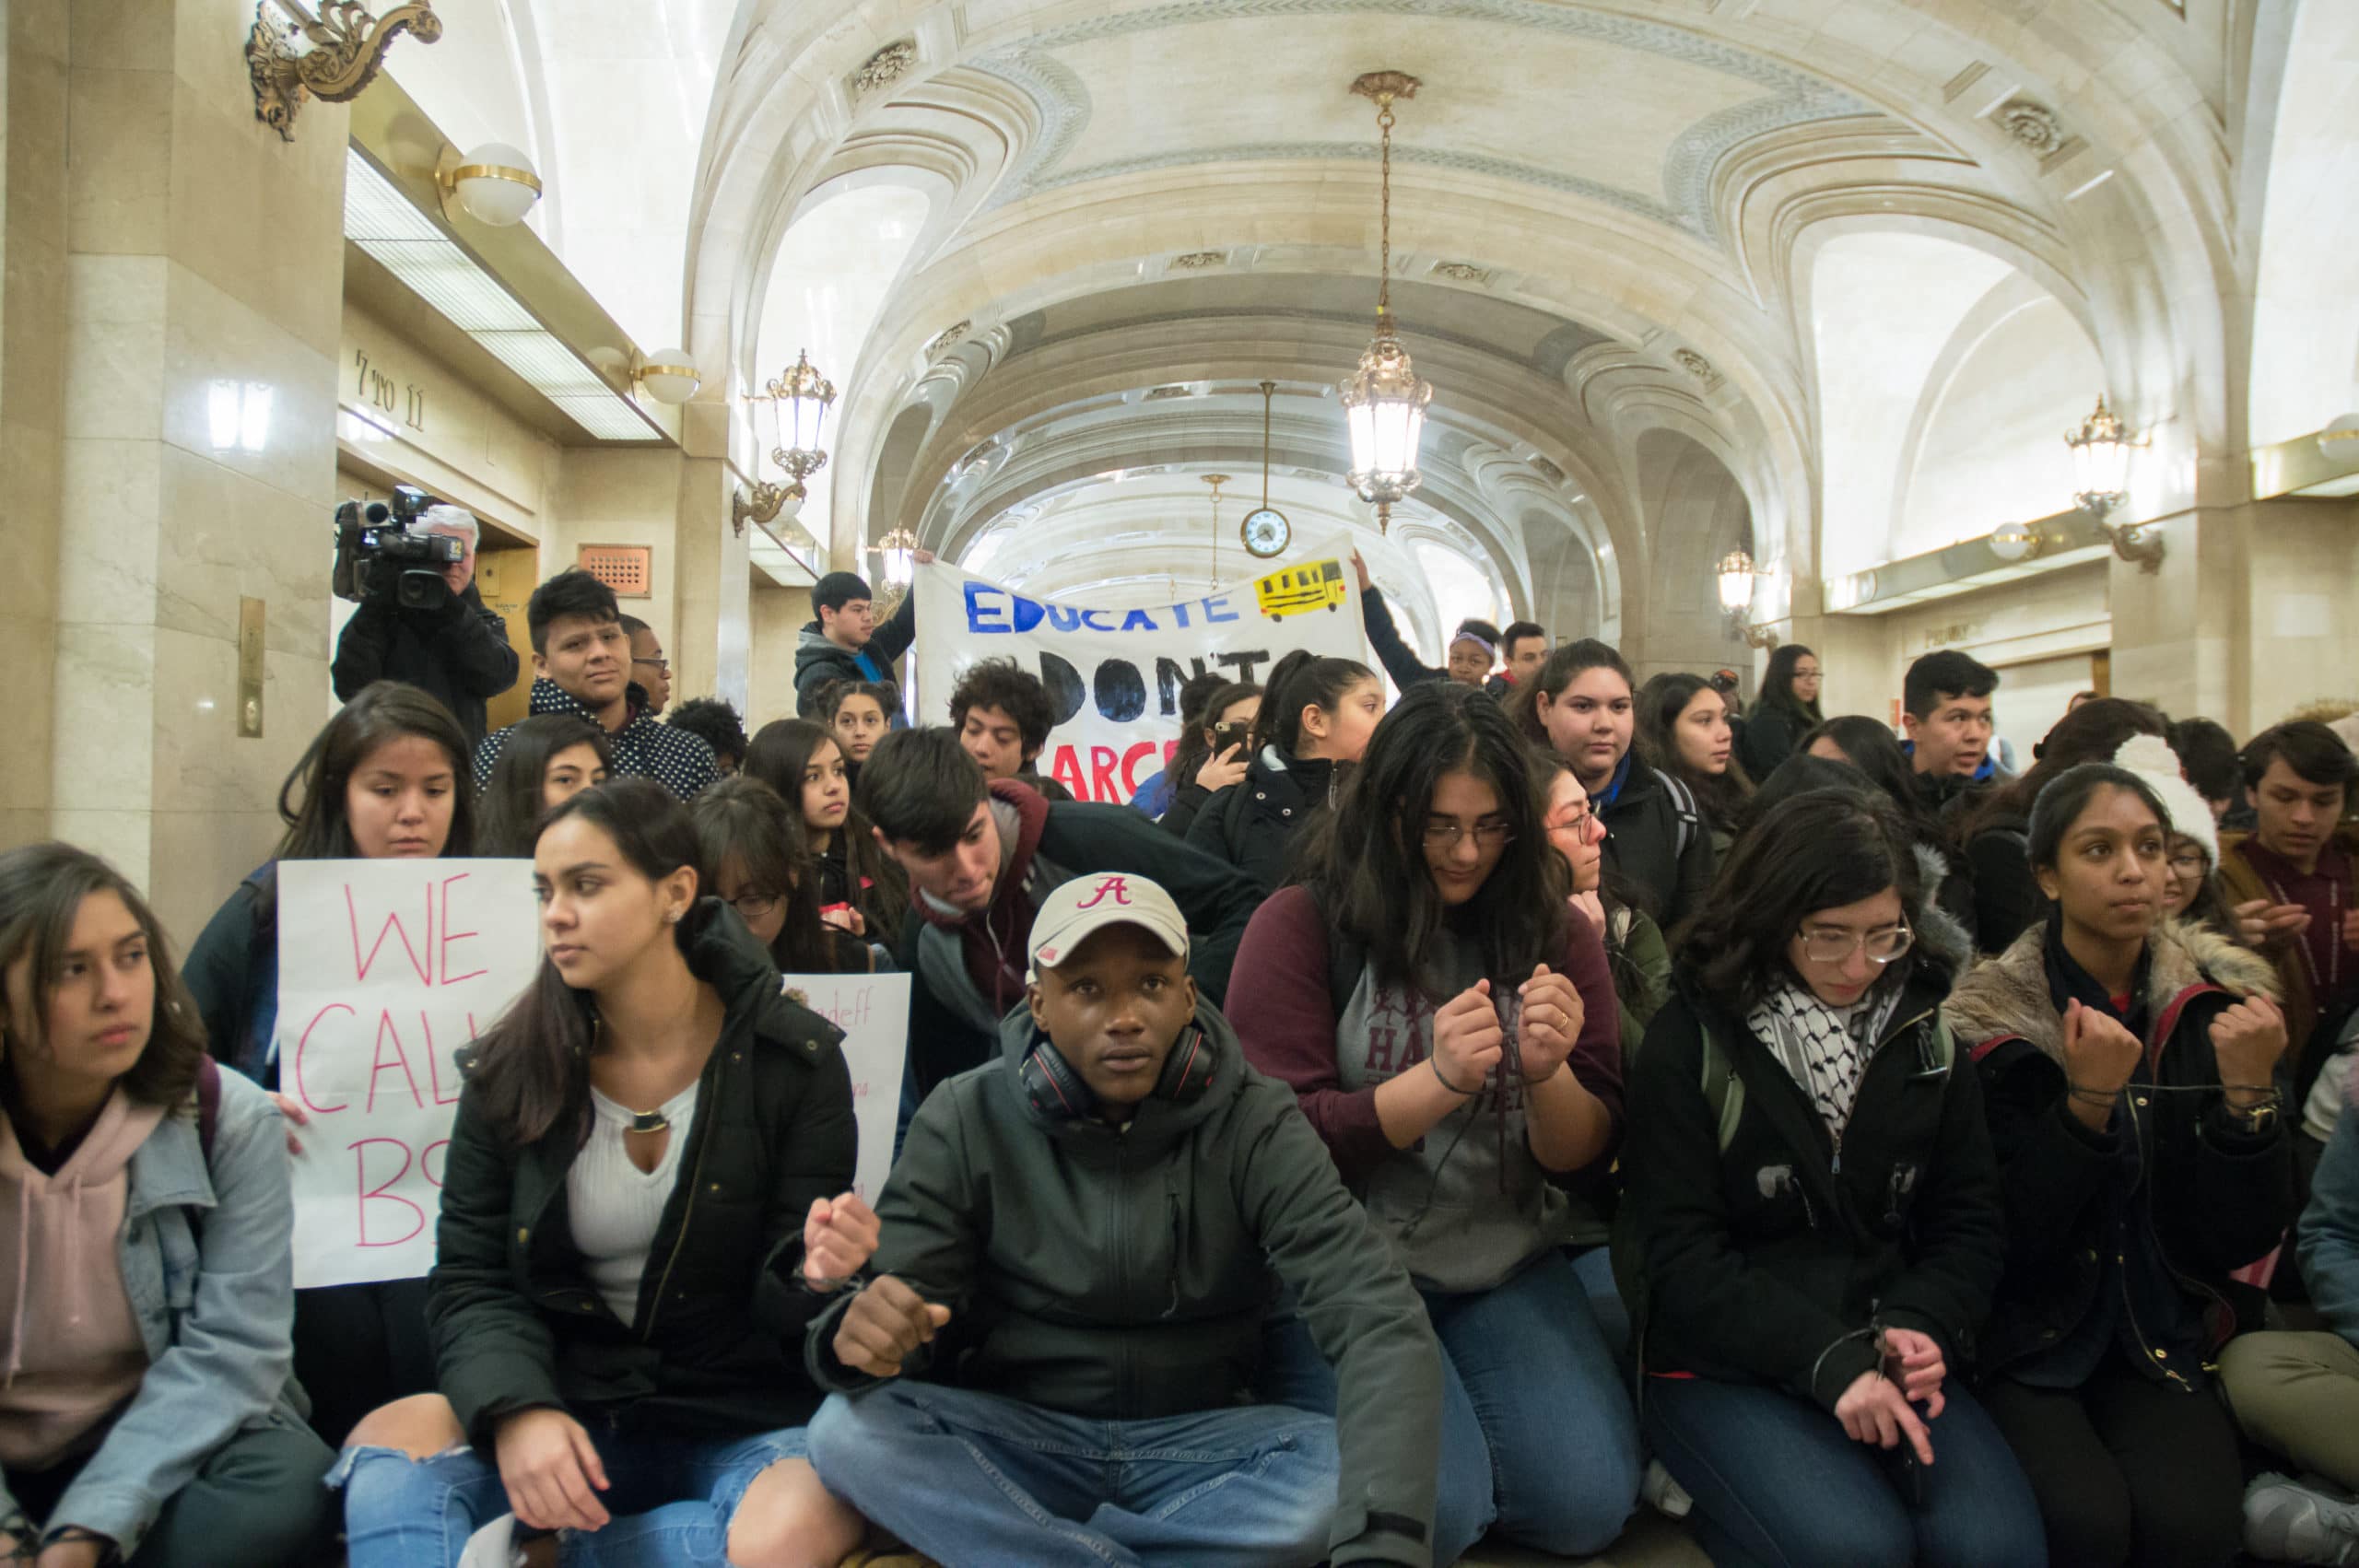 Activists with Good Kids, Mad City lead the front of the 'March for Our Lives' demonstration in Chicago on March 24. Activists with No Cop Academy set up a makeshift graveyard in Chicago's City Hall with tombstones to represent people killed by the police, and programs shut by the city. Chicago youth who took part in the national school walkout over gun violence on March 14th briefly occupied City Hall in the late afternoon to demand the city rethink its plan to open a new $95 million police academy. Photo by Aaron Cynic.